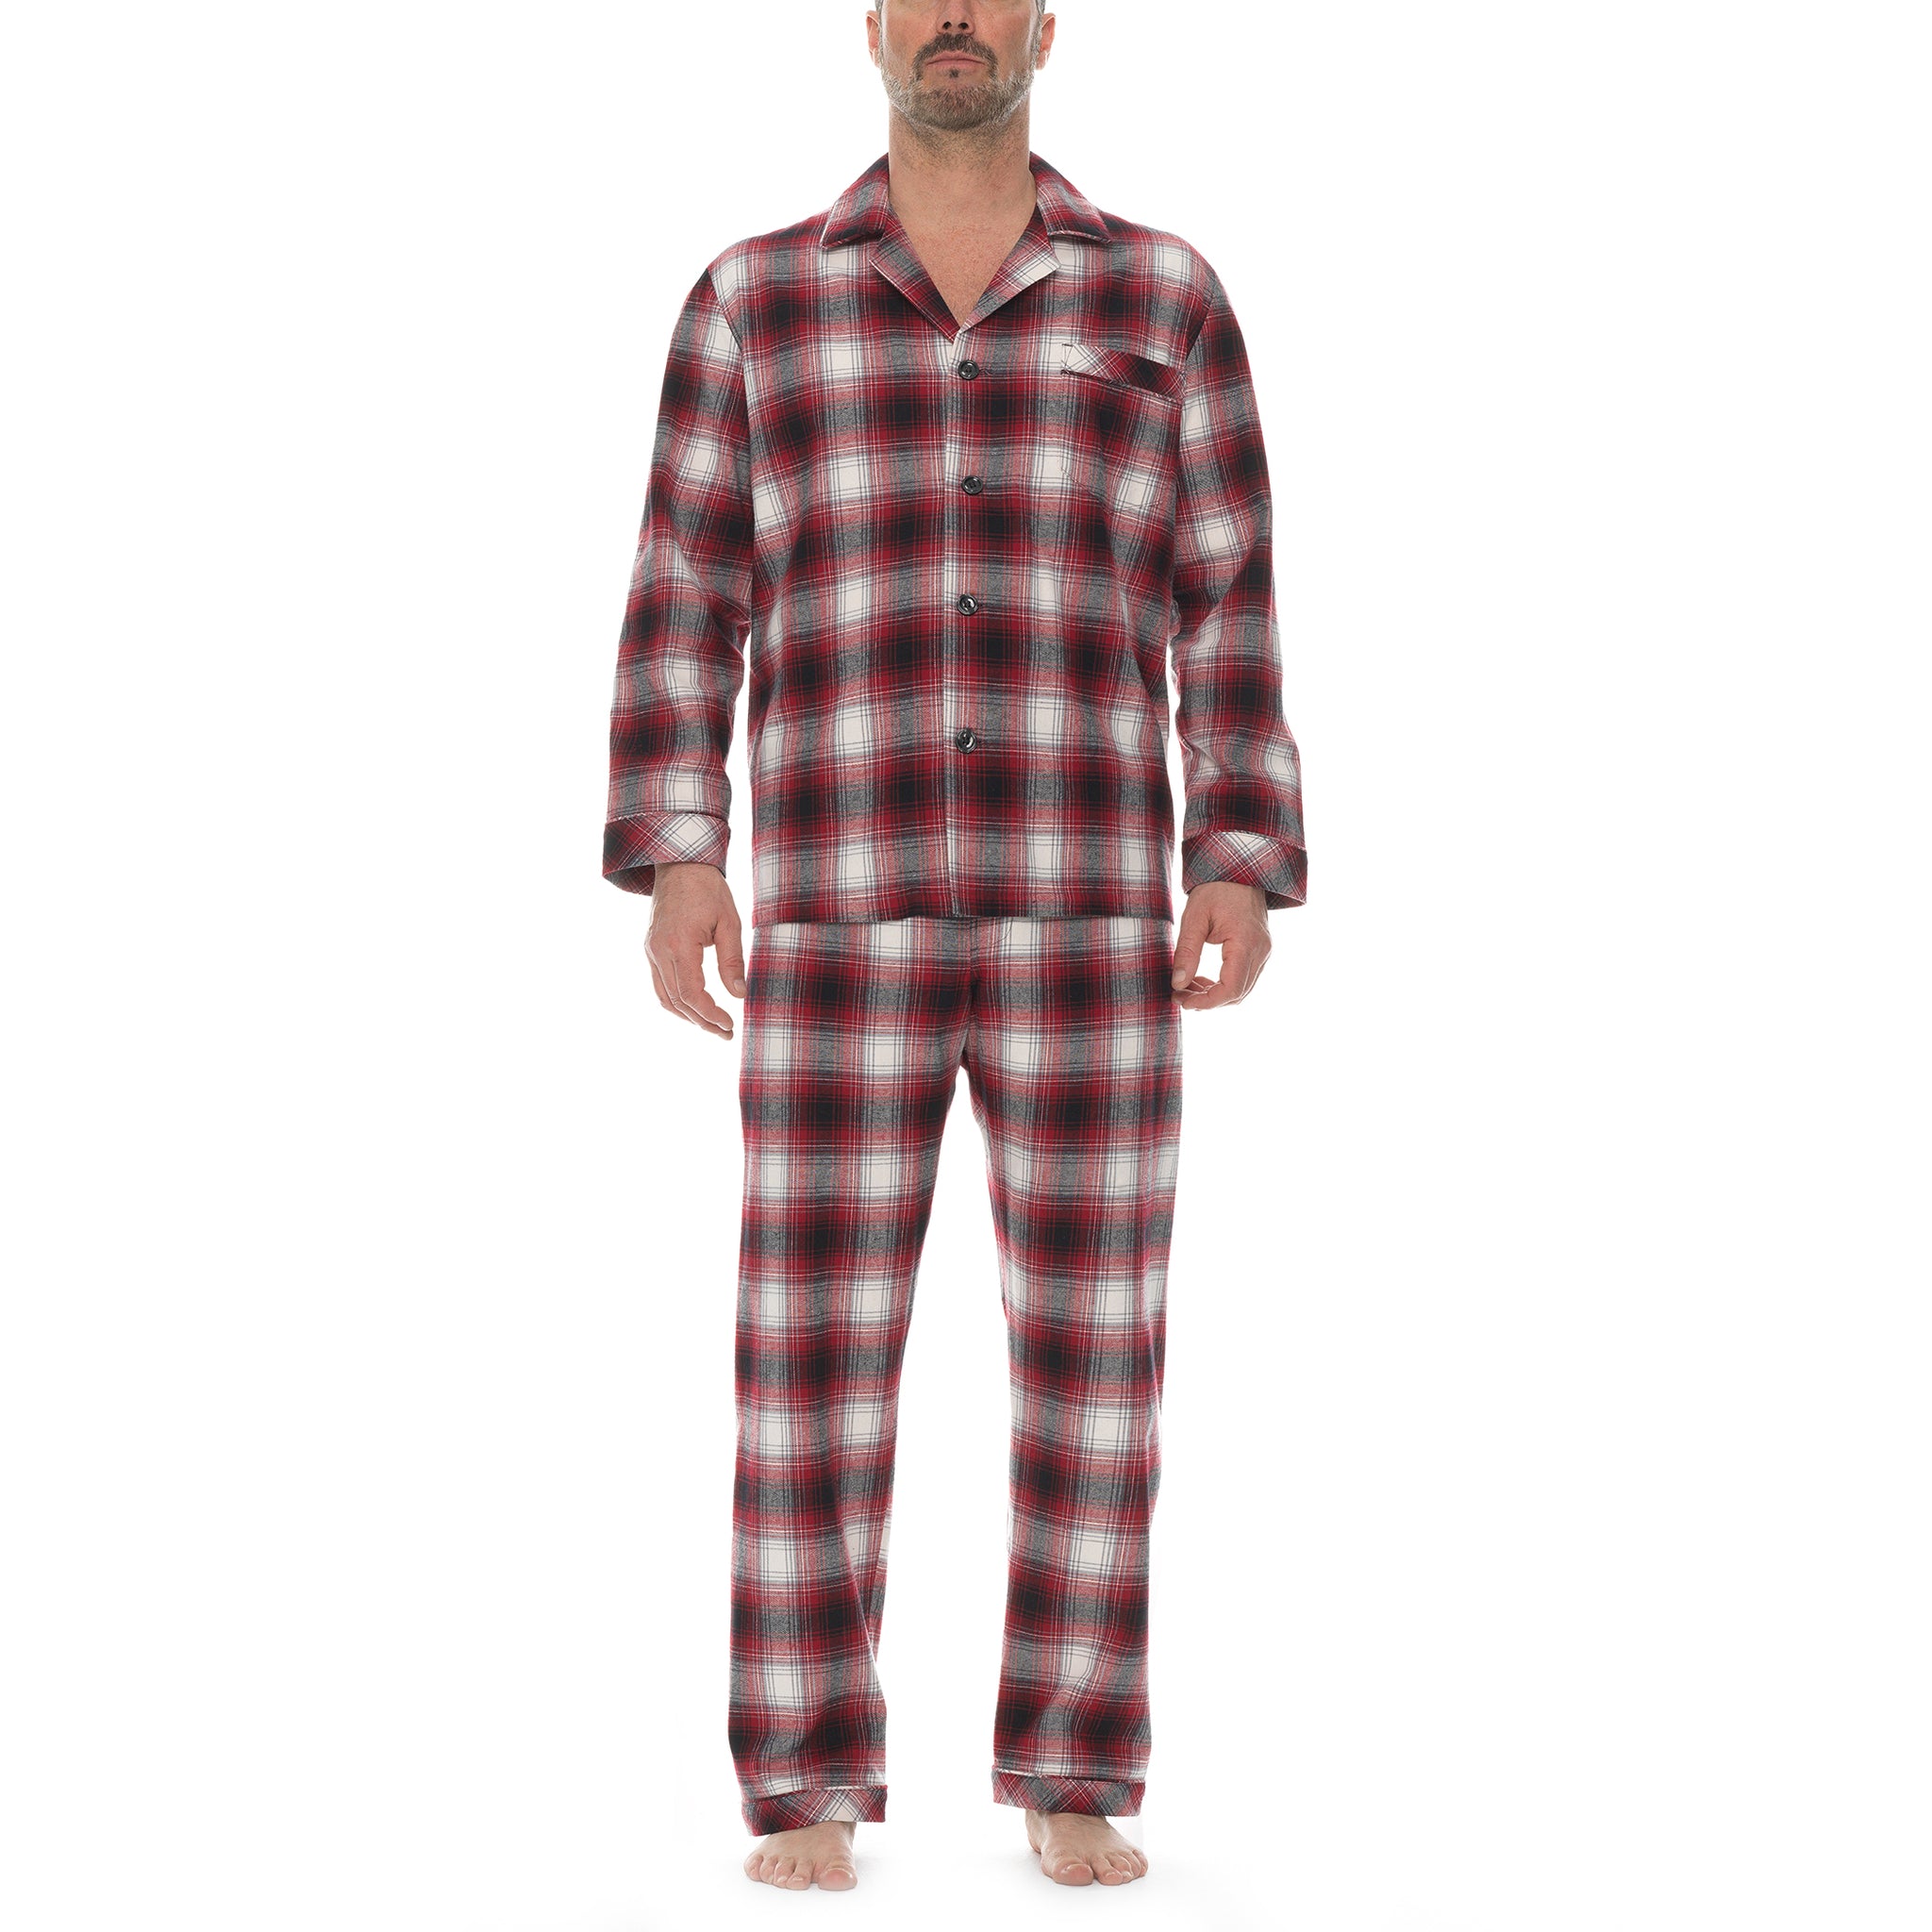 Introducing Our Brushed Organic Cotton Plaid PJ's 💕 Soft & breathable  these will be your new favourites for lounging